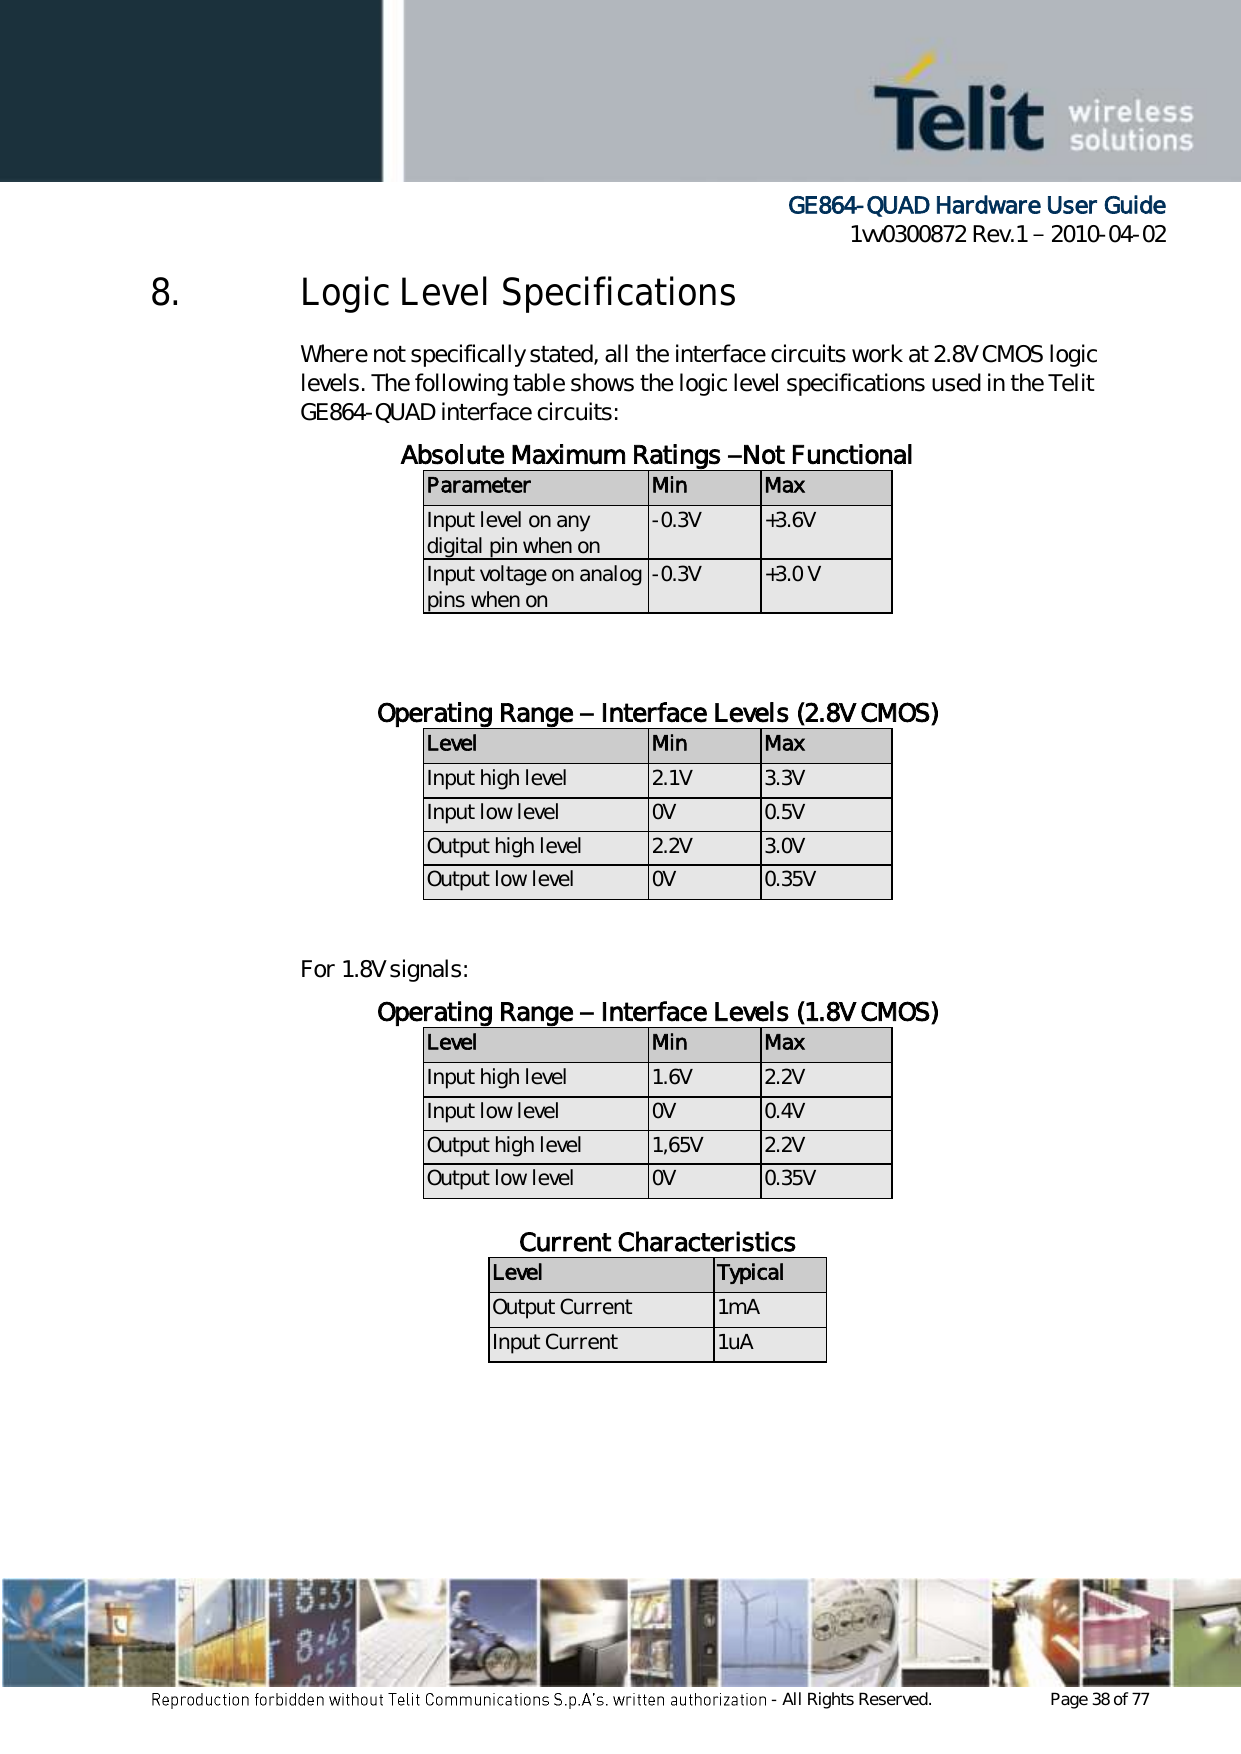      GE864-QUAD Hardware User Guide 1vv0300872 Rev.1   2010-04-02 - All Rights Reserved.    Page 38 of 77  8. Logic Level Specifications Where not specifically stated, all the interface circuits work at 2.8V CMOS logic levels. The following table shows the logic level specifications used in the Telit GE864-QUAD interface circuits: Absolute Maximum Ratings –Not Functional Parameter Min Max Input level on any digital pin when on -0.3V +3.6V Input voltage on analog pins when on -0.3V +3.0 V   Operating Range – Interface Levels (2.8V CMOS) Level Min Max Input high level 2.1V 3.3V Input low level 0V 0.5V Output high level 2.2V 3.0V Output low level 0V 0.35V  For 1.8V signals: Operating Range – Interface Levels (1.8V CMOS) Level Min Max Input high level 1.6V 2.2V Input low level 0V 0.4V Output high level 1,65V 2.2V Output low level 0V 0.35V  Current Characteristics Level Typical Output Current 1mA Input Current 1uA   